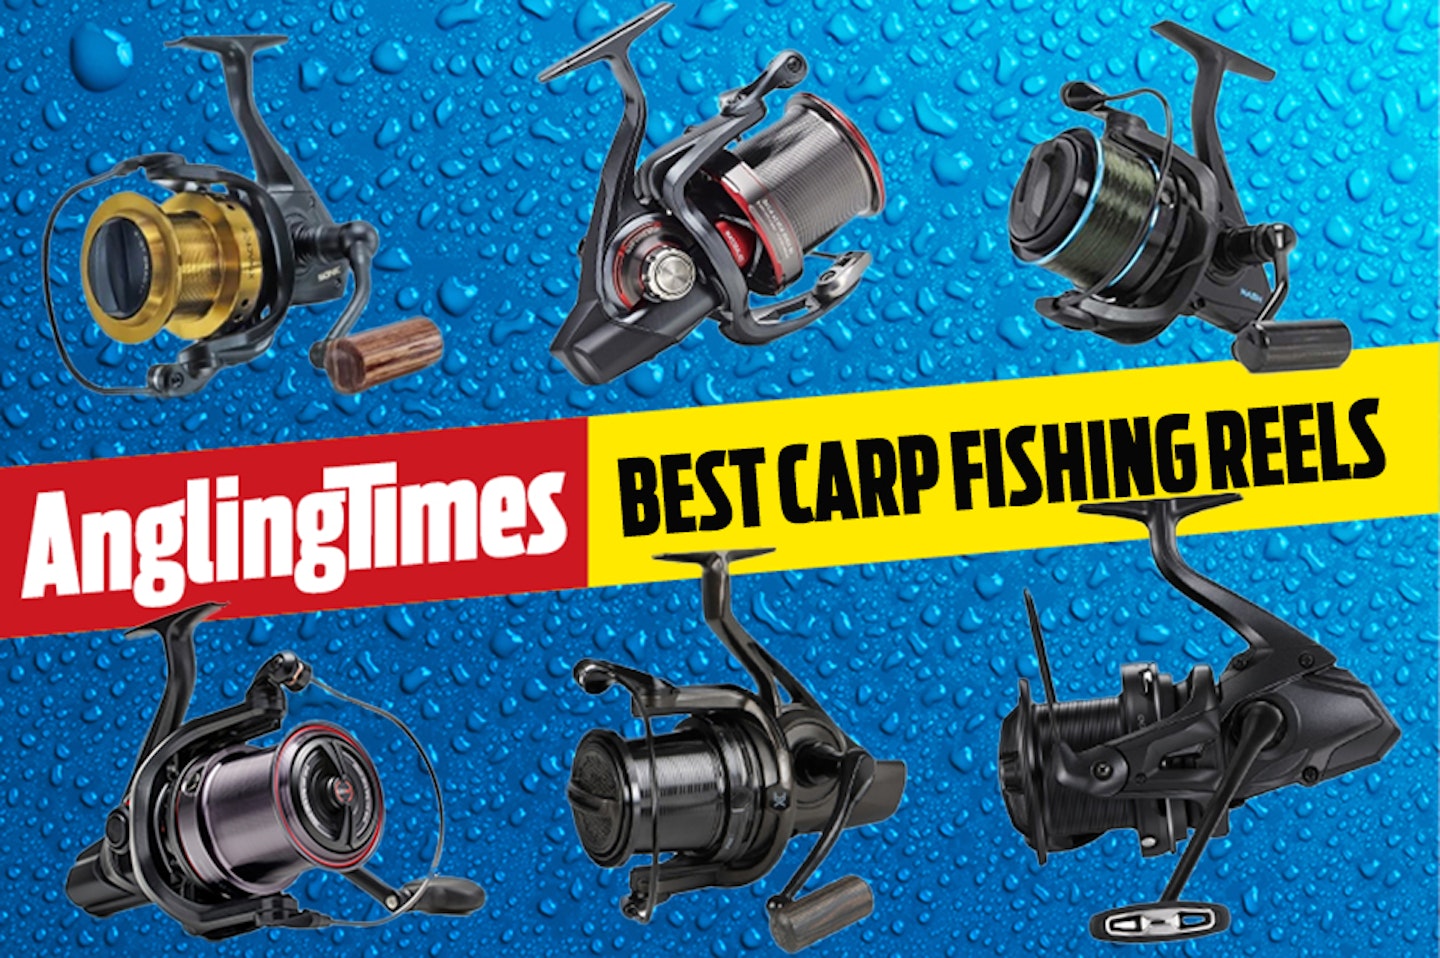 NEW Basia & BEST new reels and rods coming in 2023 from Daiwa